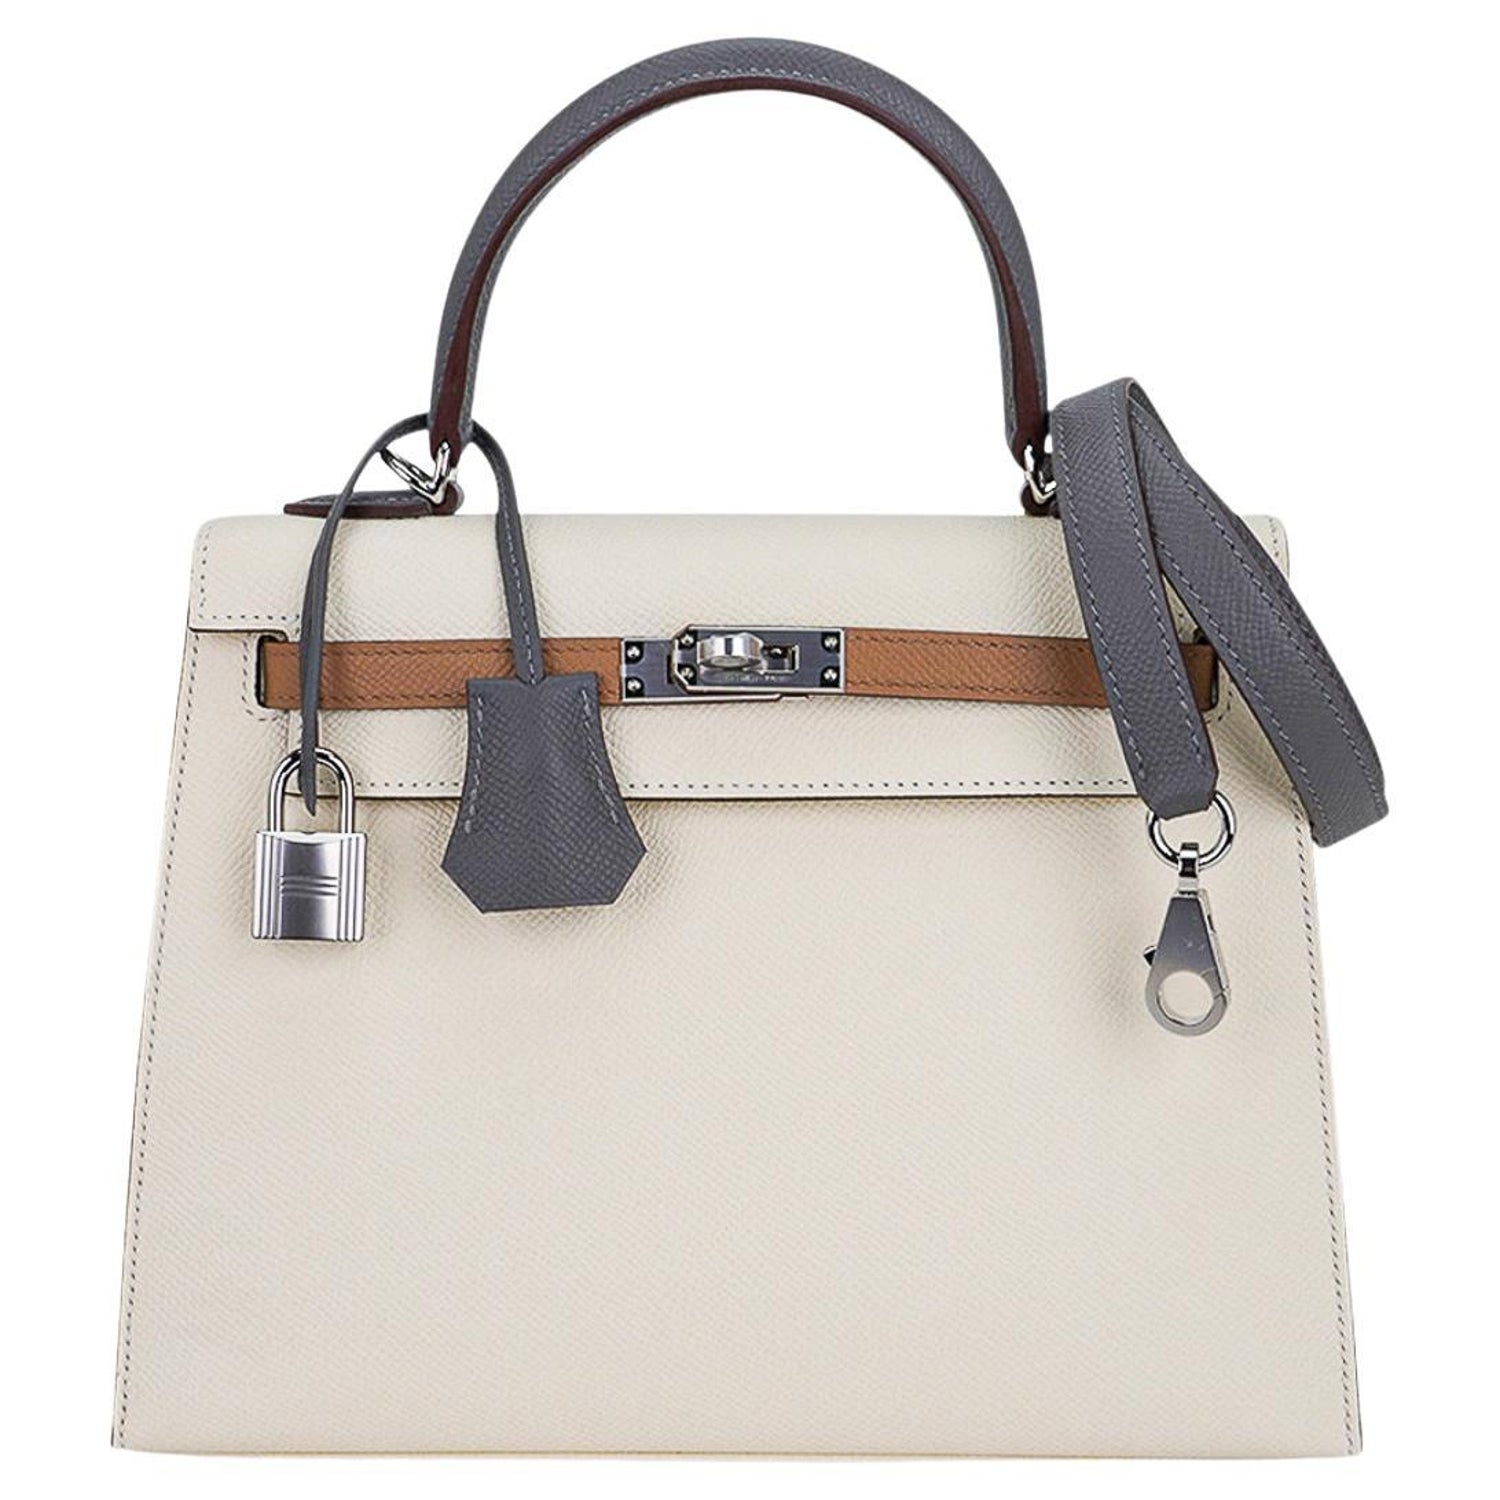 Hermes Berline Bag For Fall Winter 2014 Collection